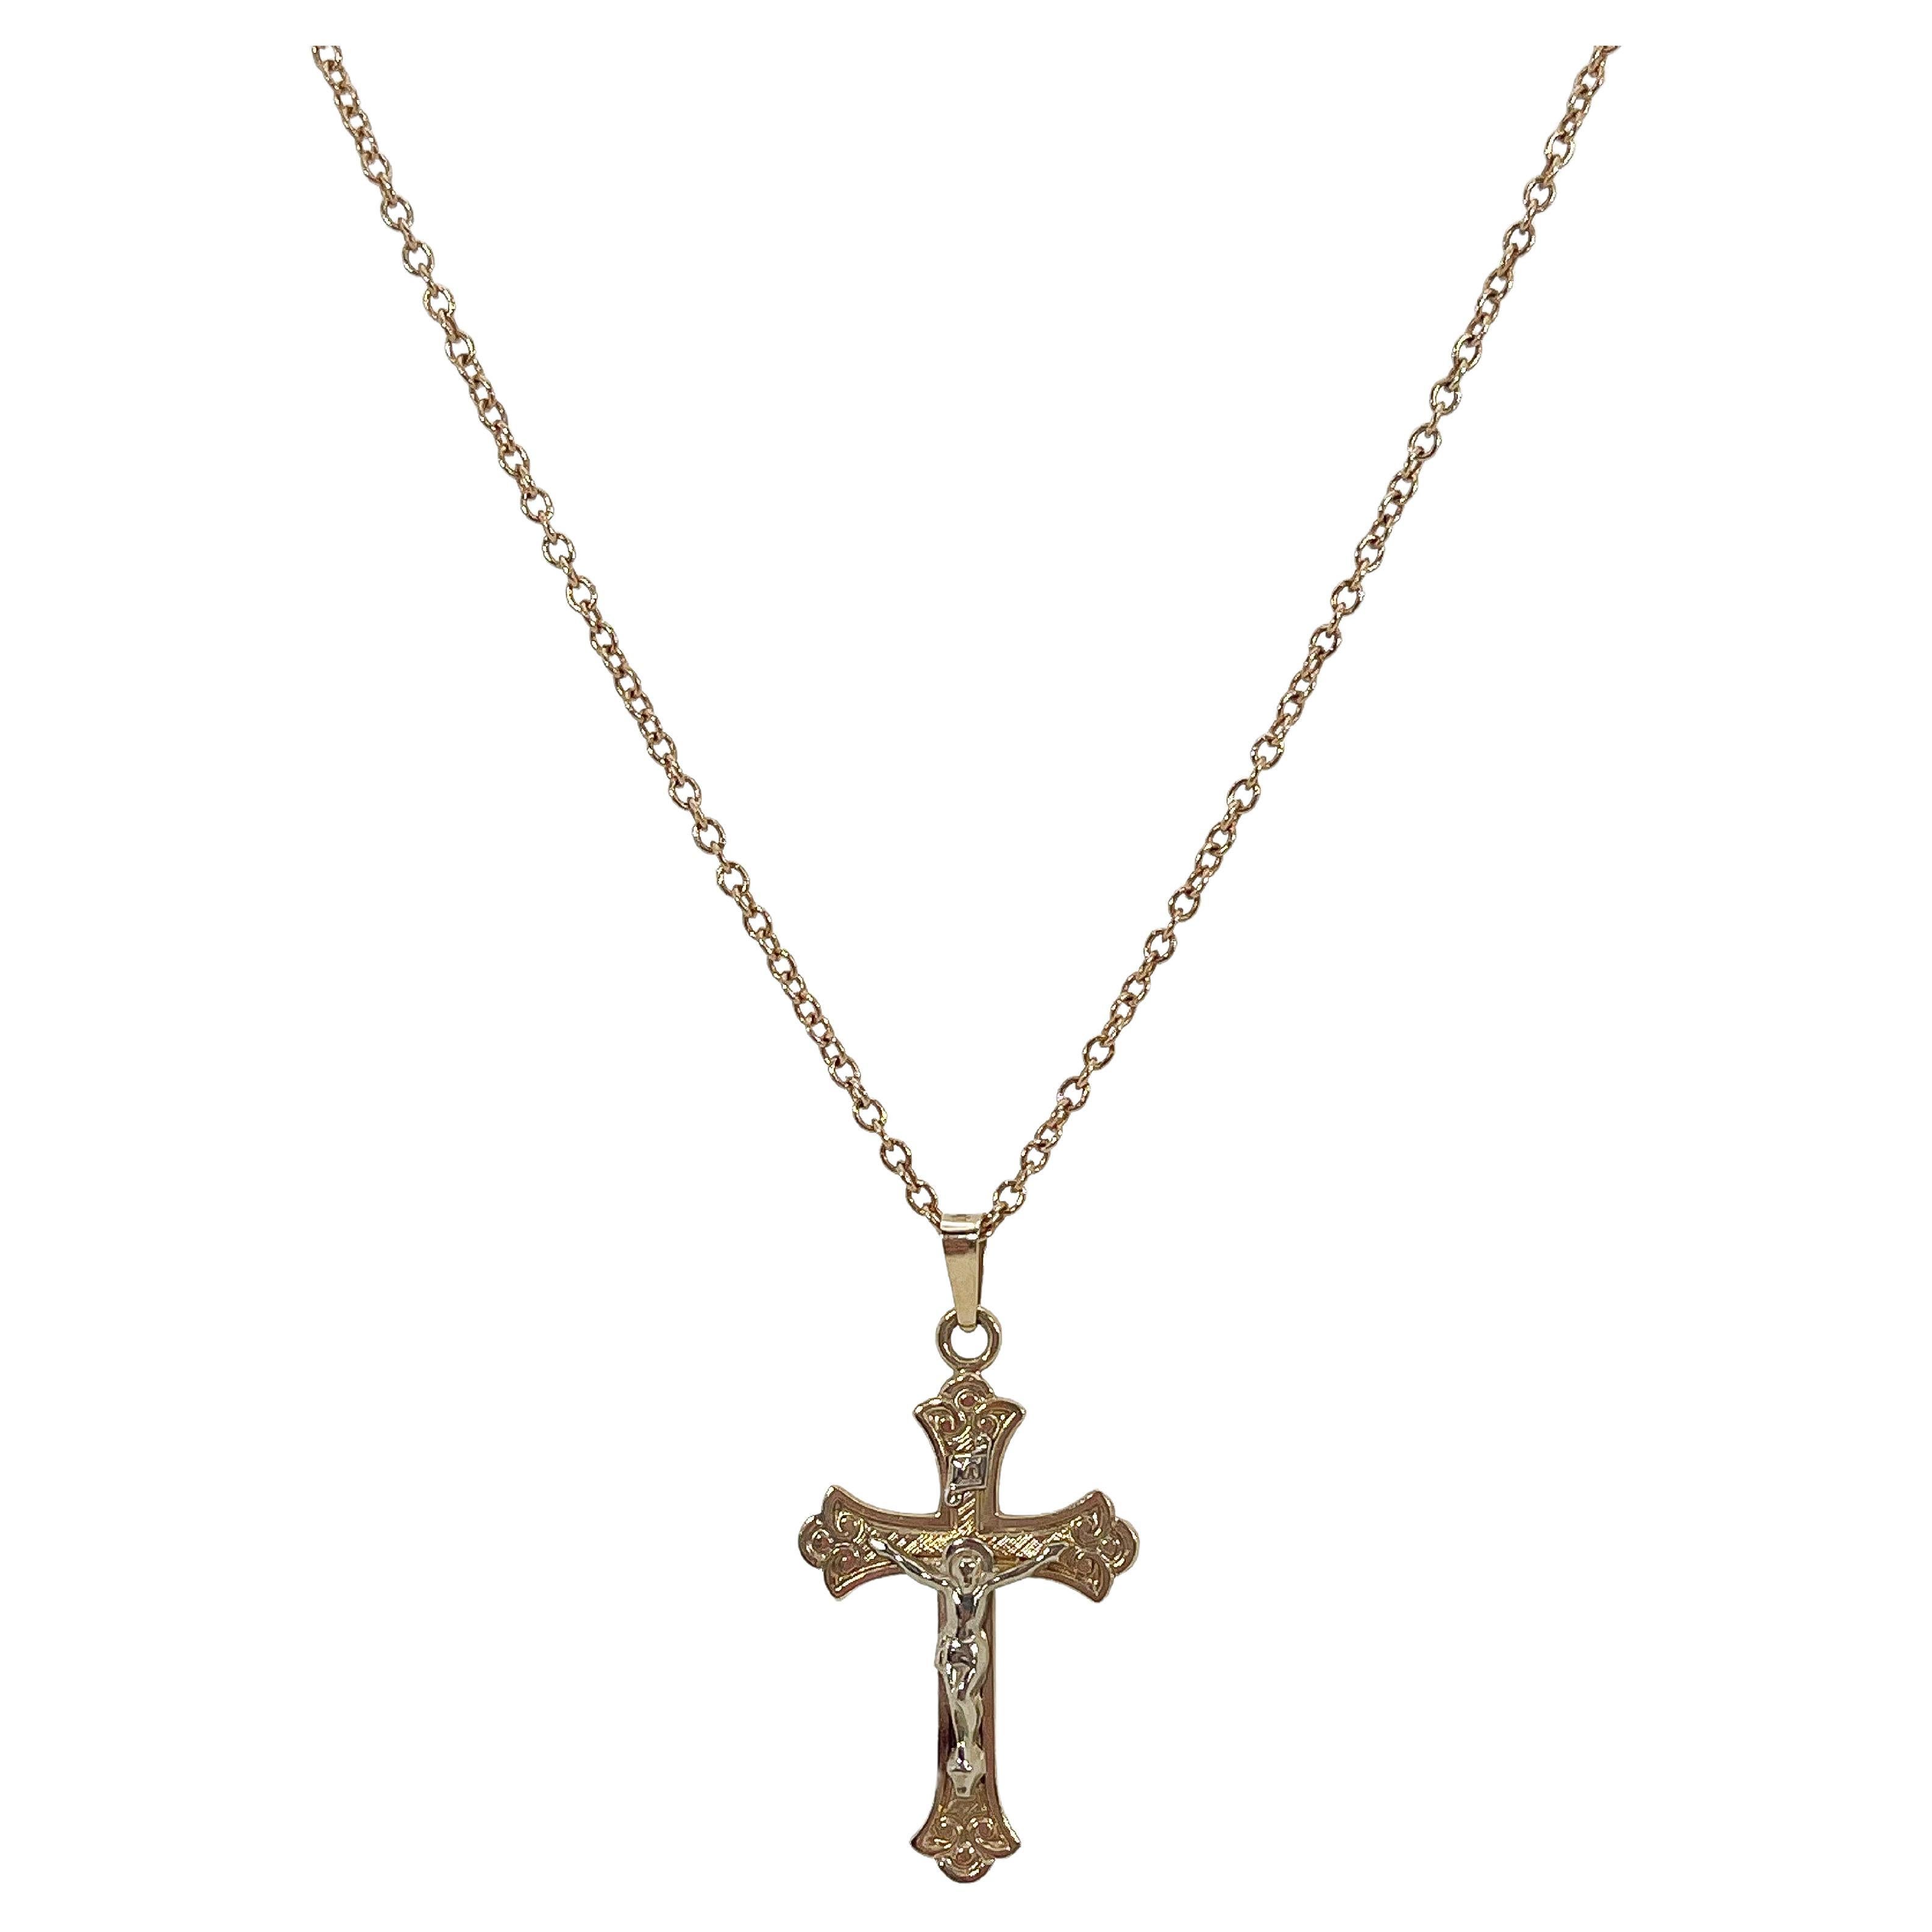 What is the meaning of a cross pendant?